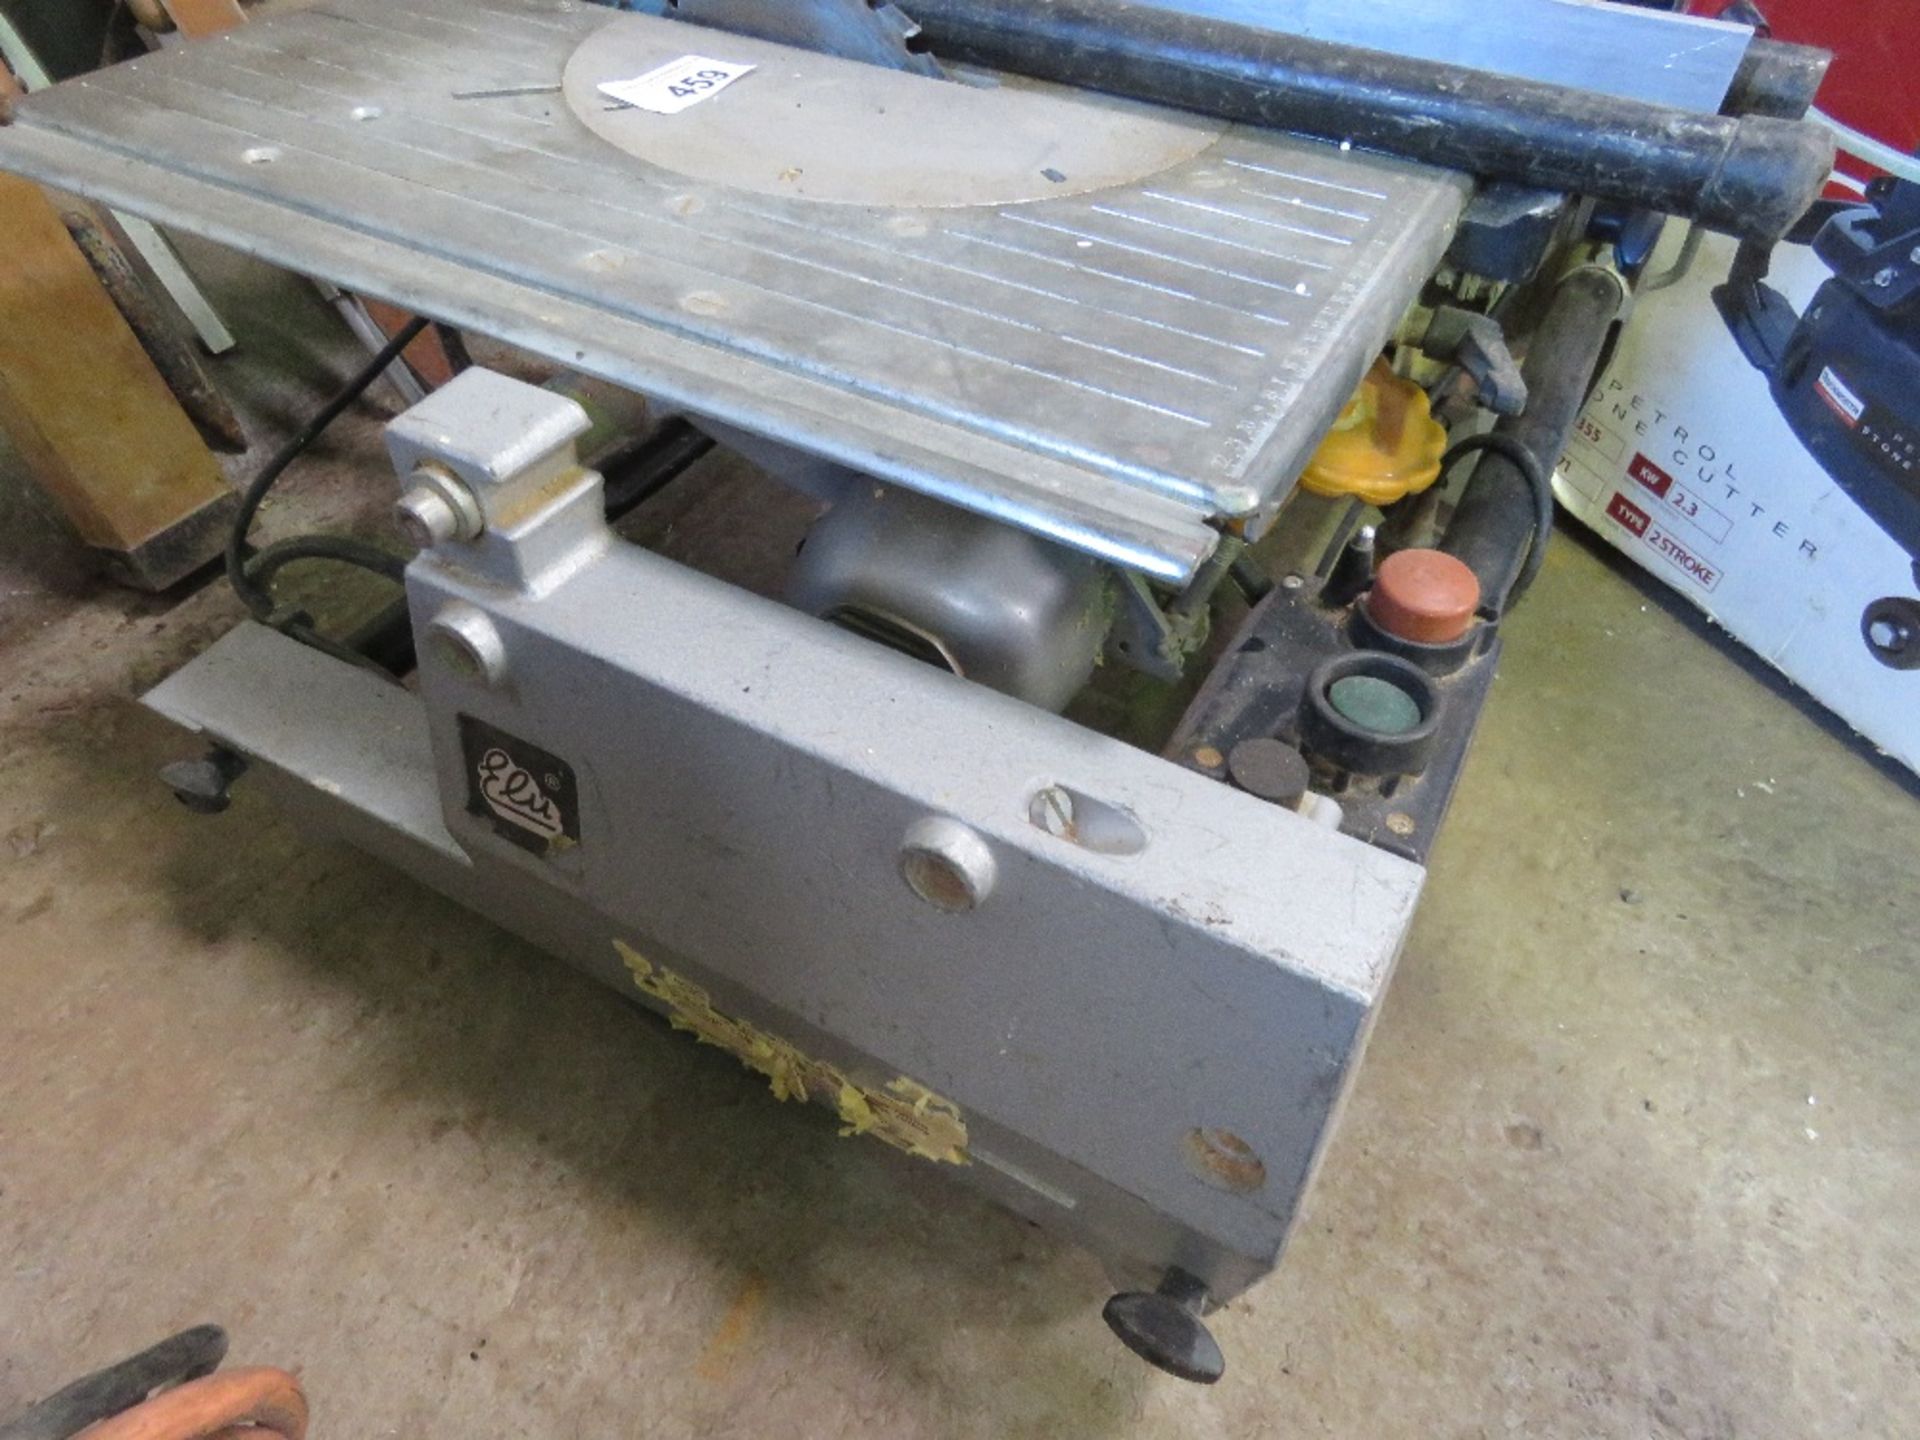 ELU 110VOLT SAWBENCH WITH LEGS. THIS LOT IS SOLD UNDER THE AUCTIONEERS MARGIN SCHEME, THEREFORE N - Image 2 of 5